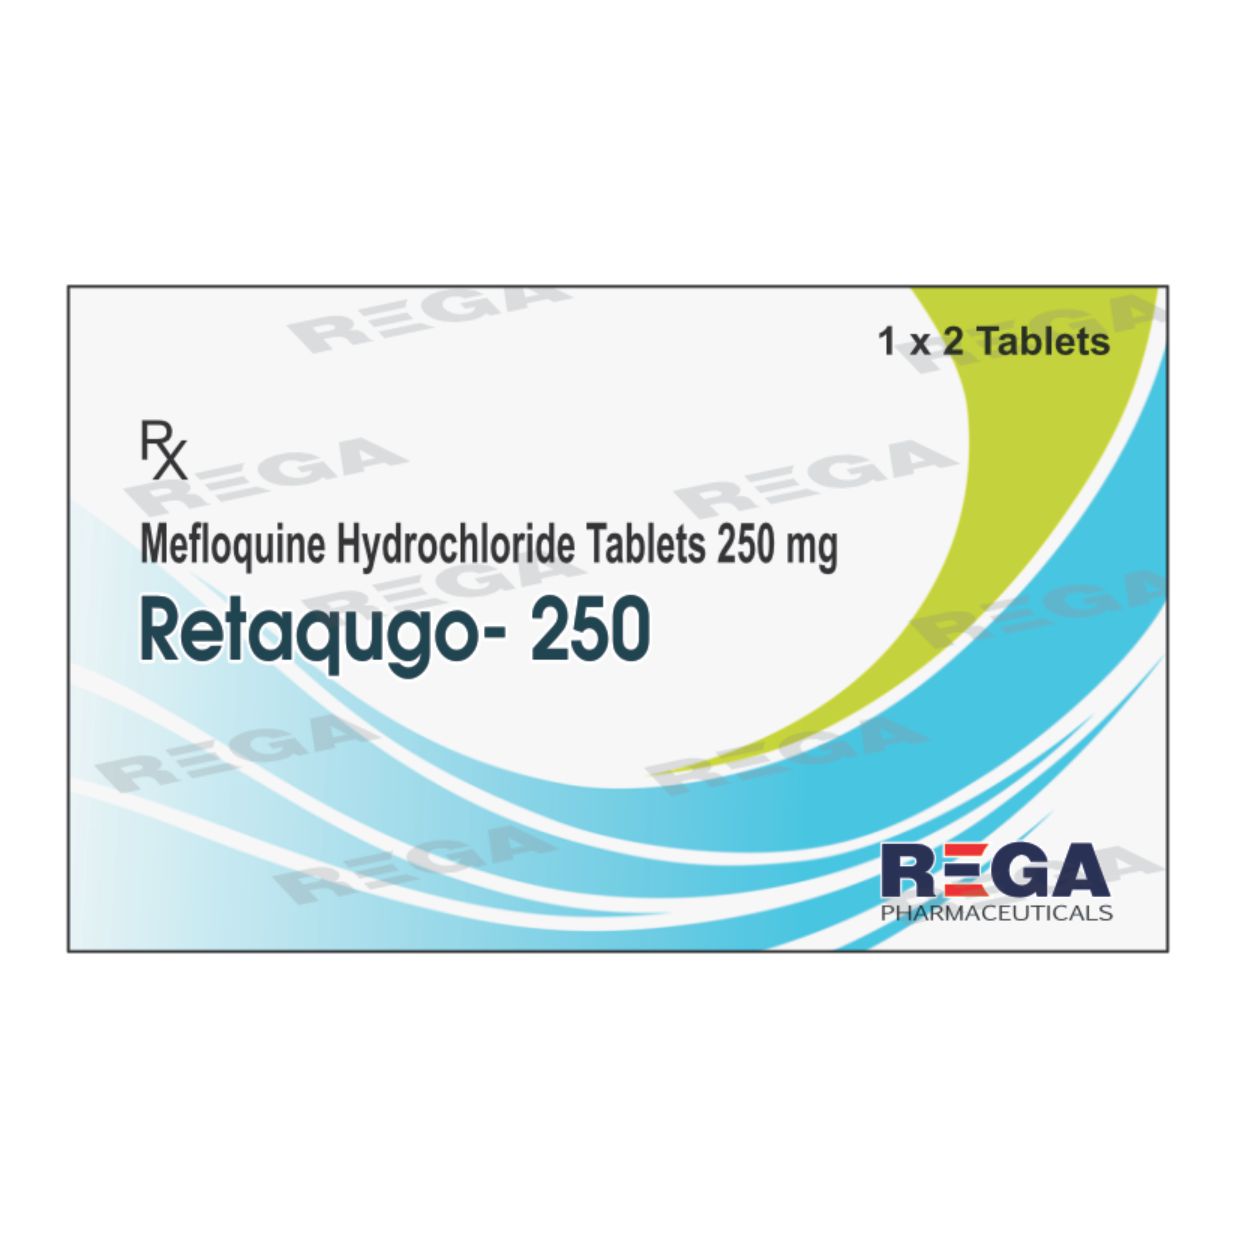 Mefloquine Hydrochloride Tablets 250 mg